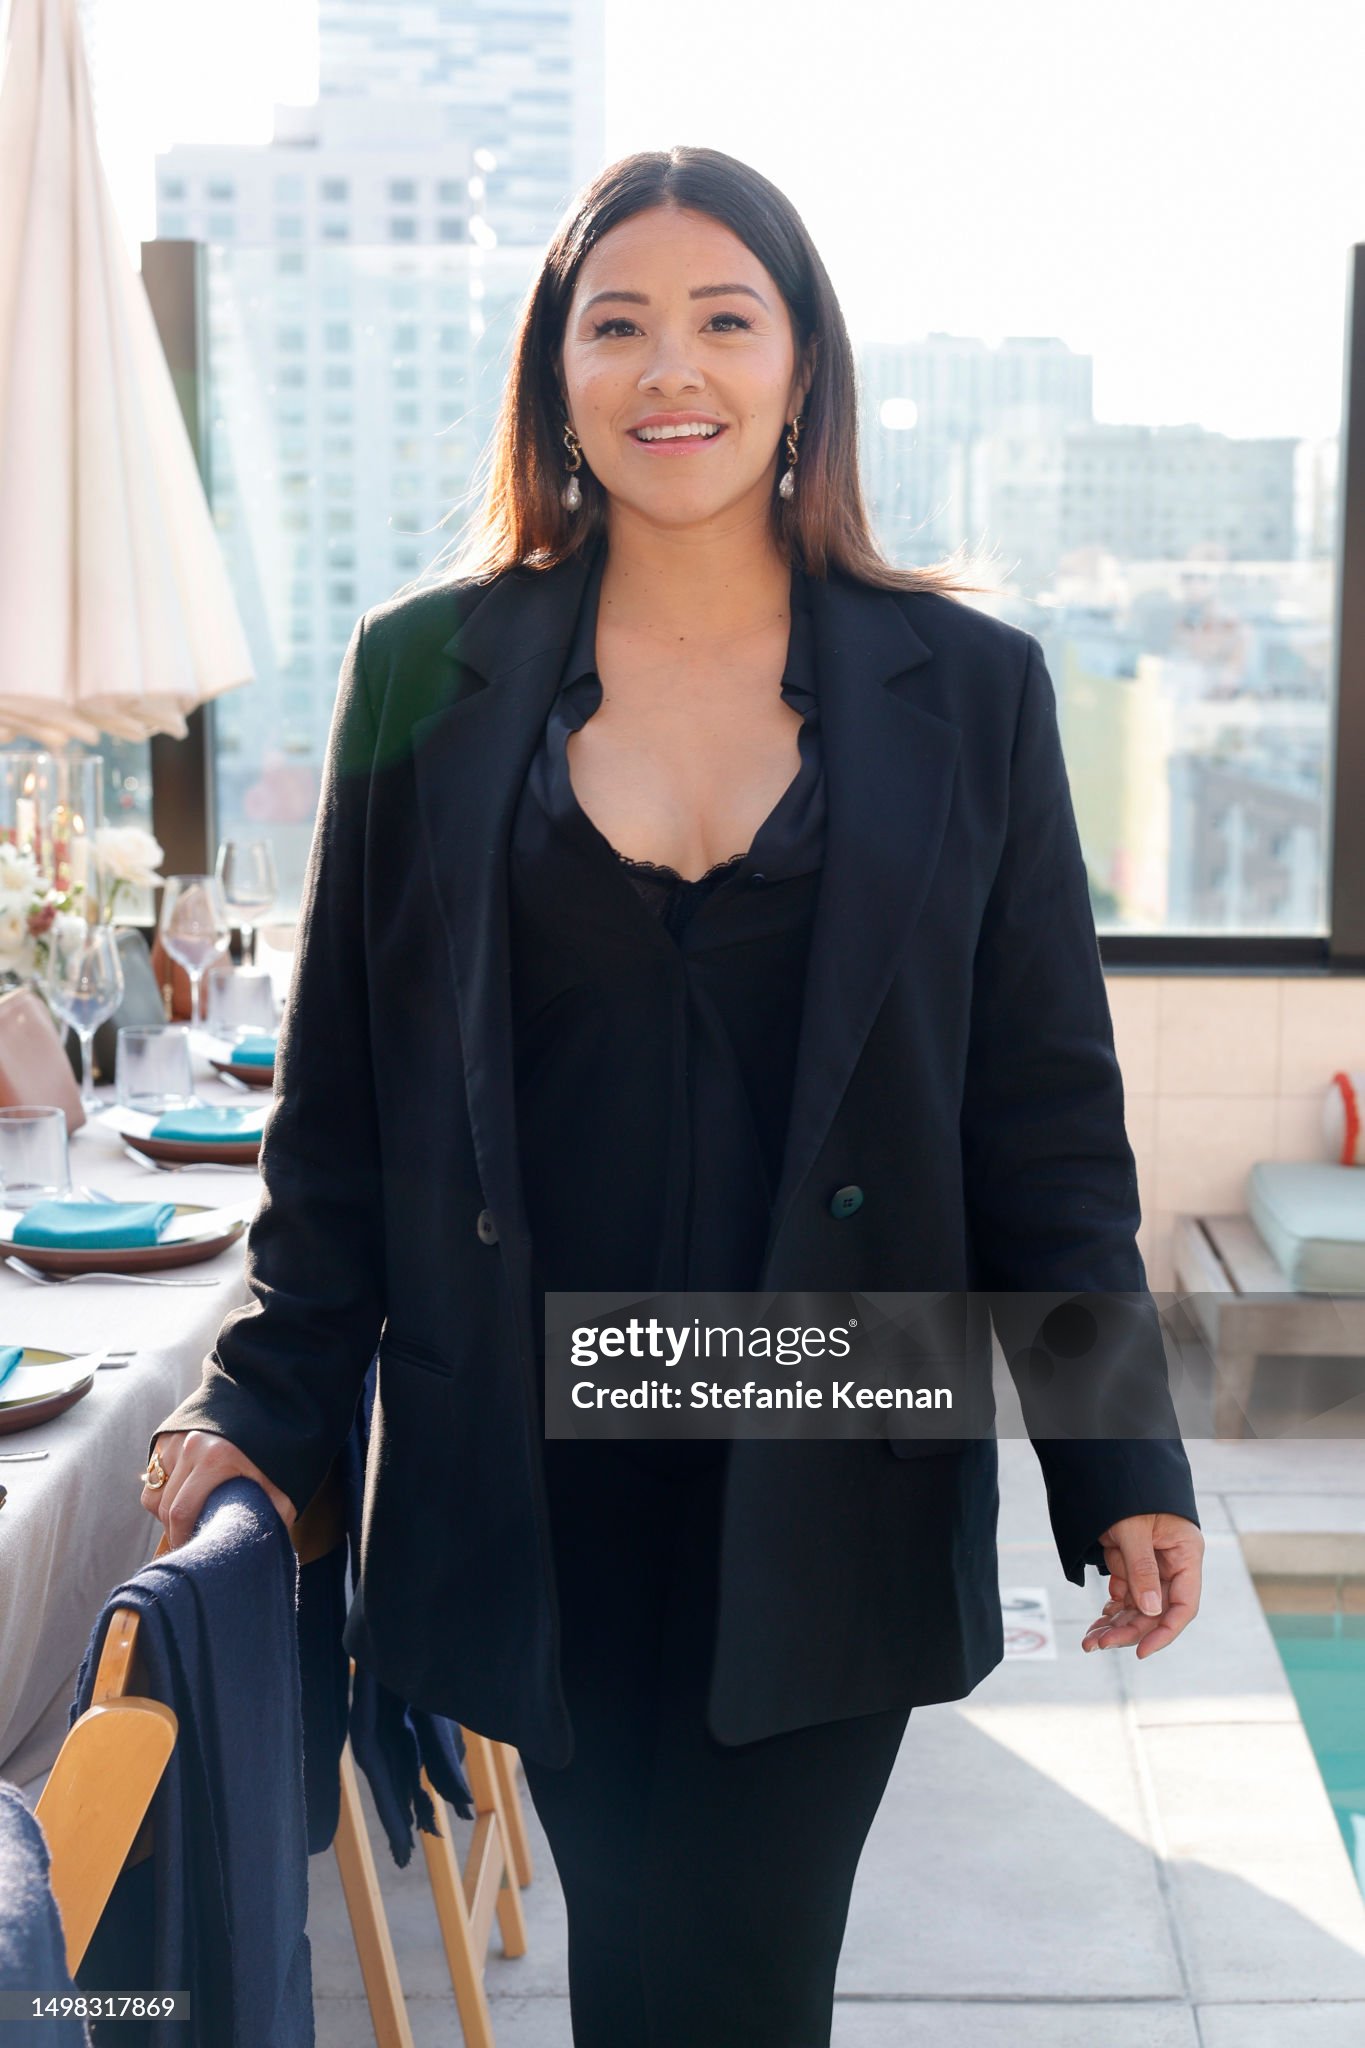 [REQUET] Gina Rodriguez - Cuyana Nuestra Raíces Dinner on June 13, 2023